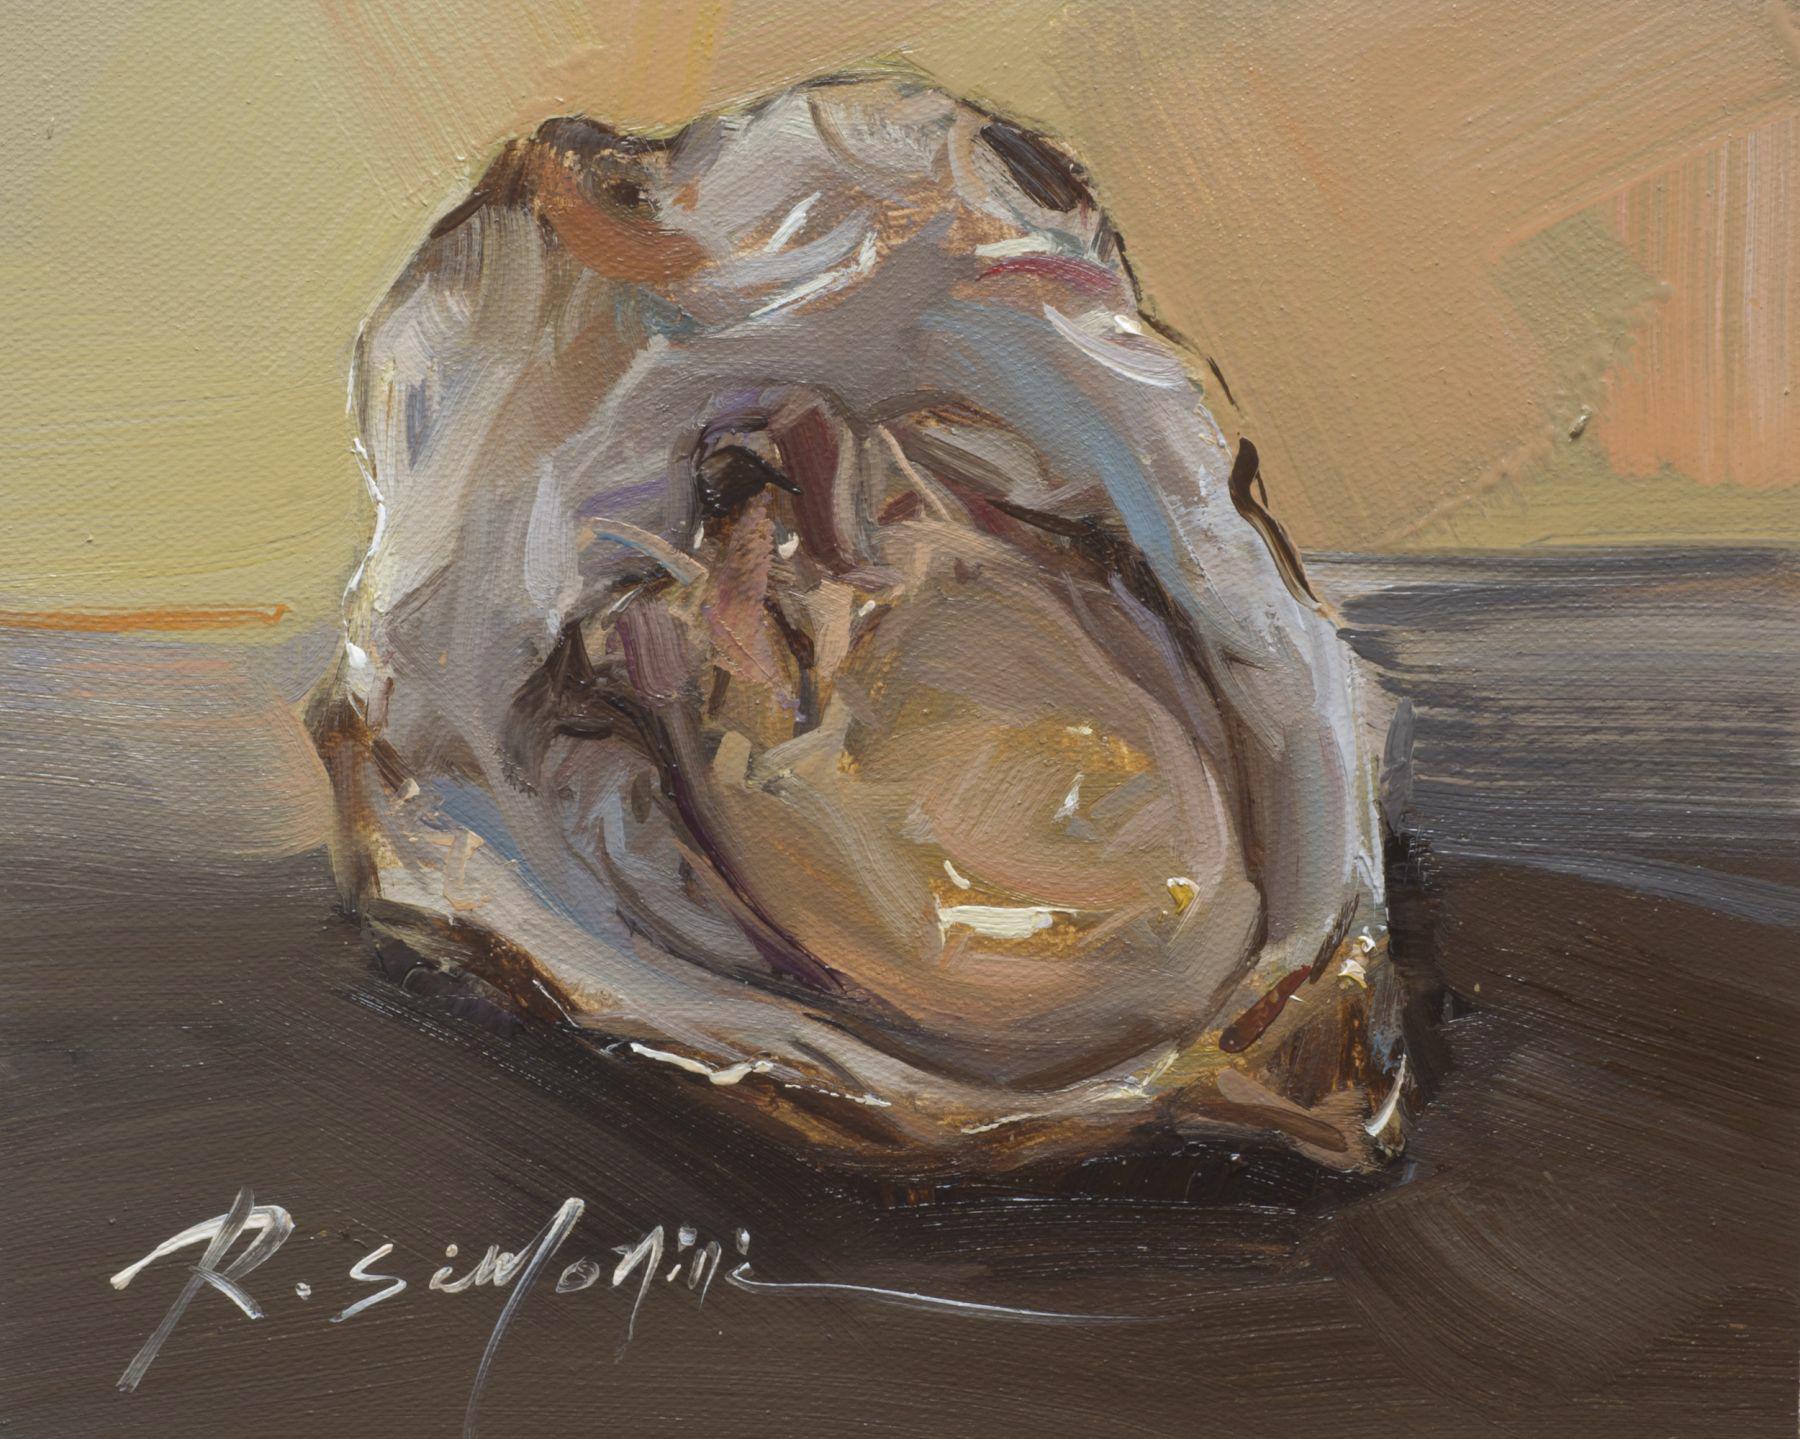 This painting by artist Ray Simonini titled "Raw" is a 8x10 nautical oil painting on canvas featuring a close-up of an oyster shell against a calm soft grey and vibrant yellow background.

About the artist:
Simonini was born in China in 1981. He